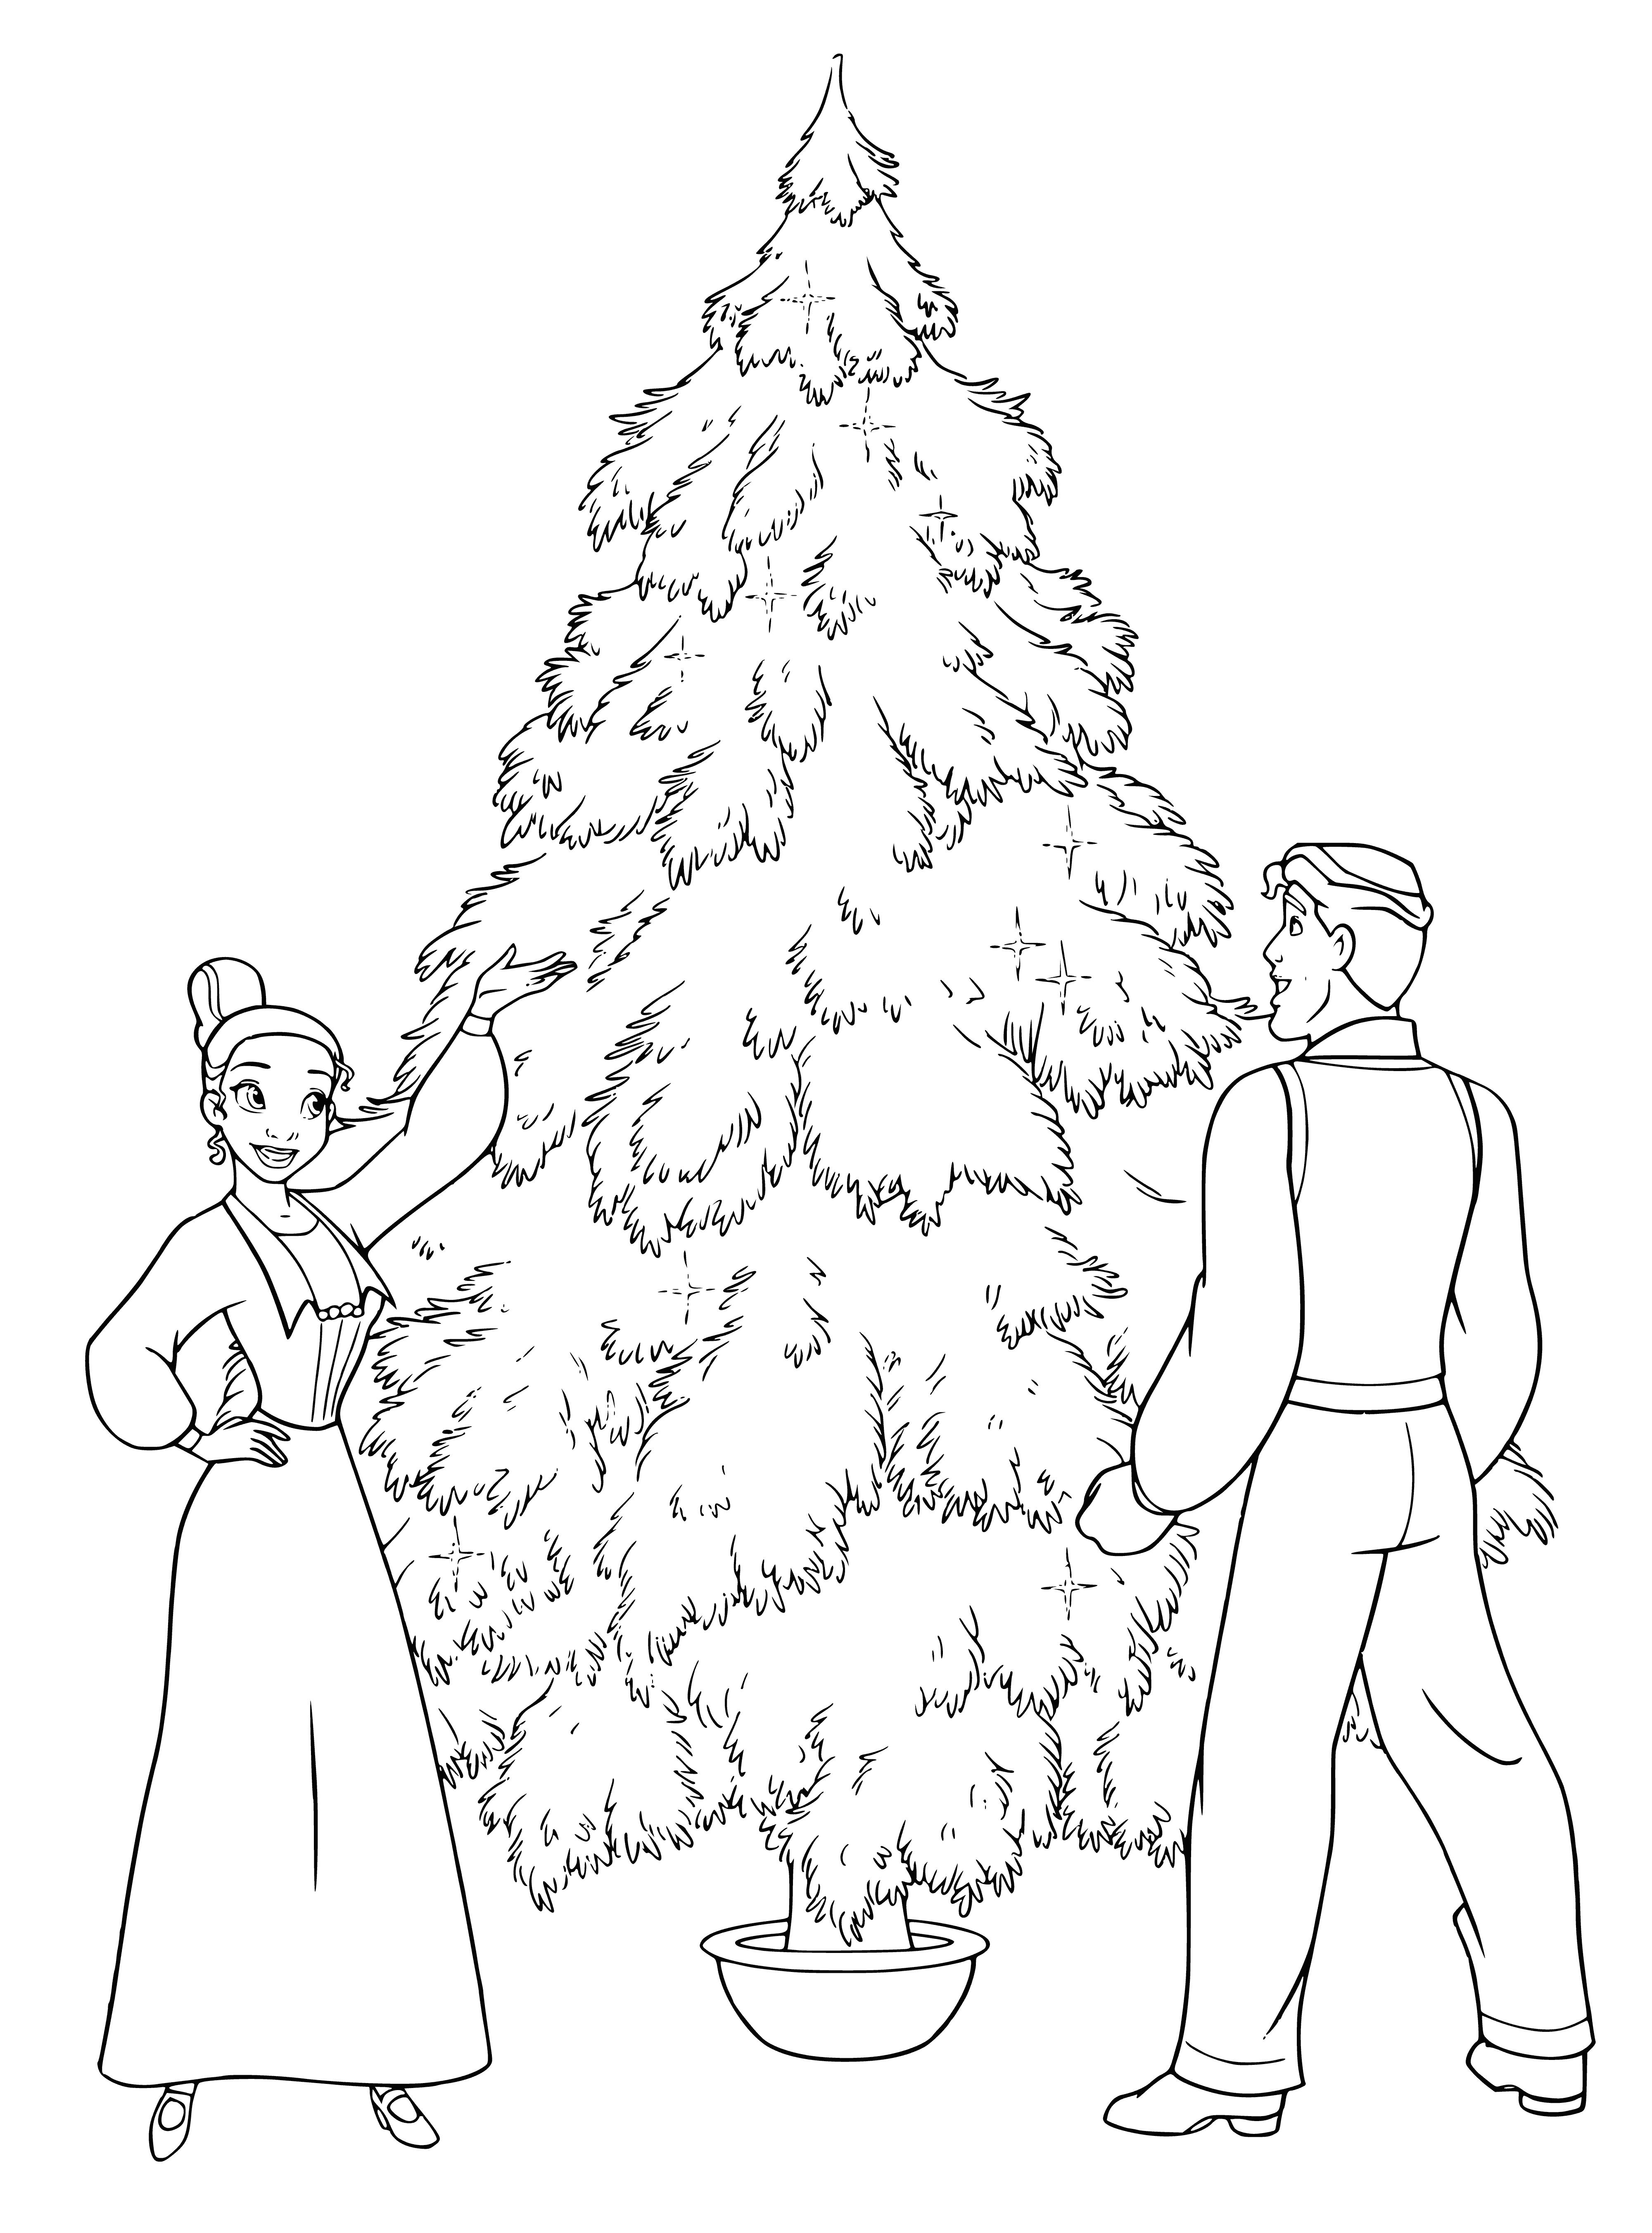 coloring page: Disney princesses gather around Christmas tree, each holding a different decoration. Snow falls gently around them, bringing festive cheer.